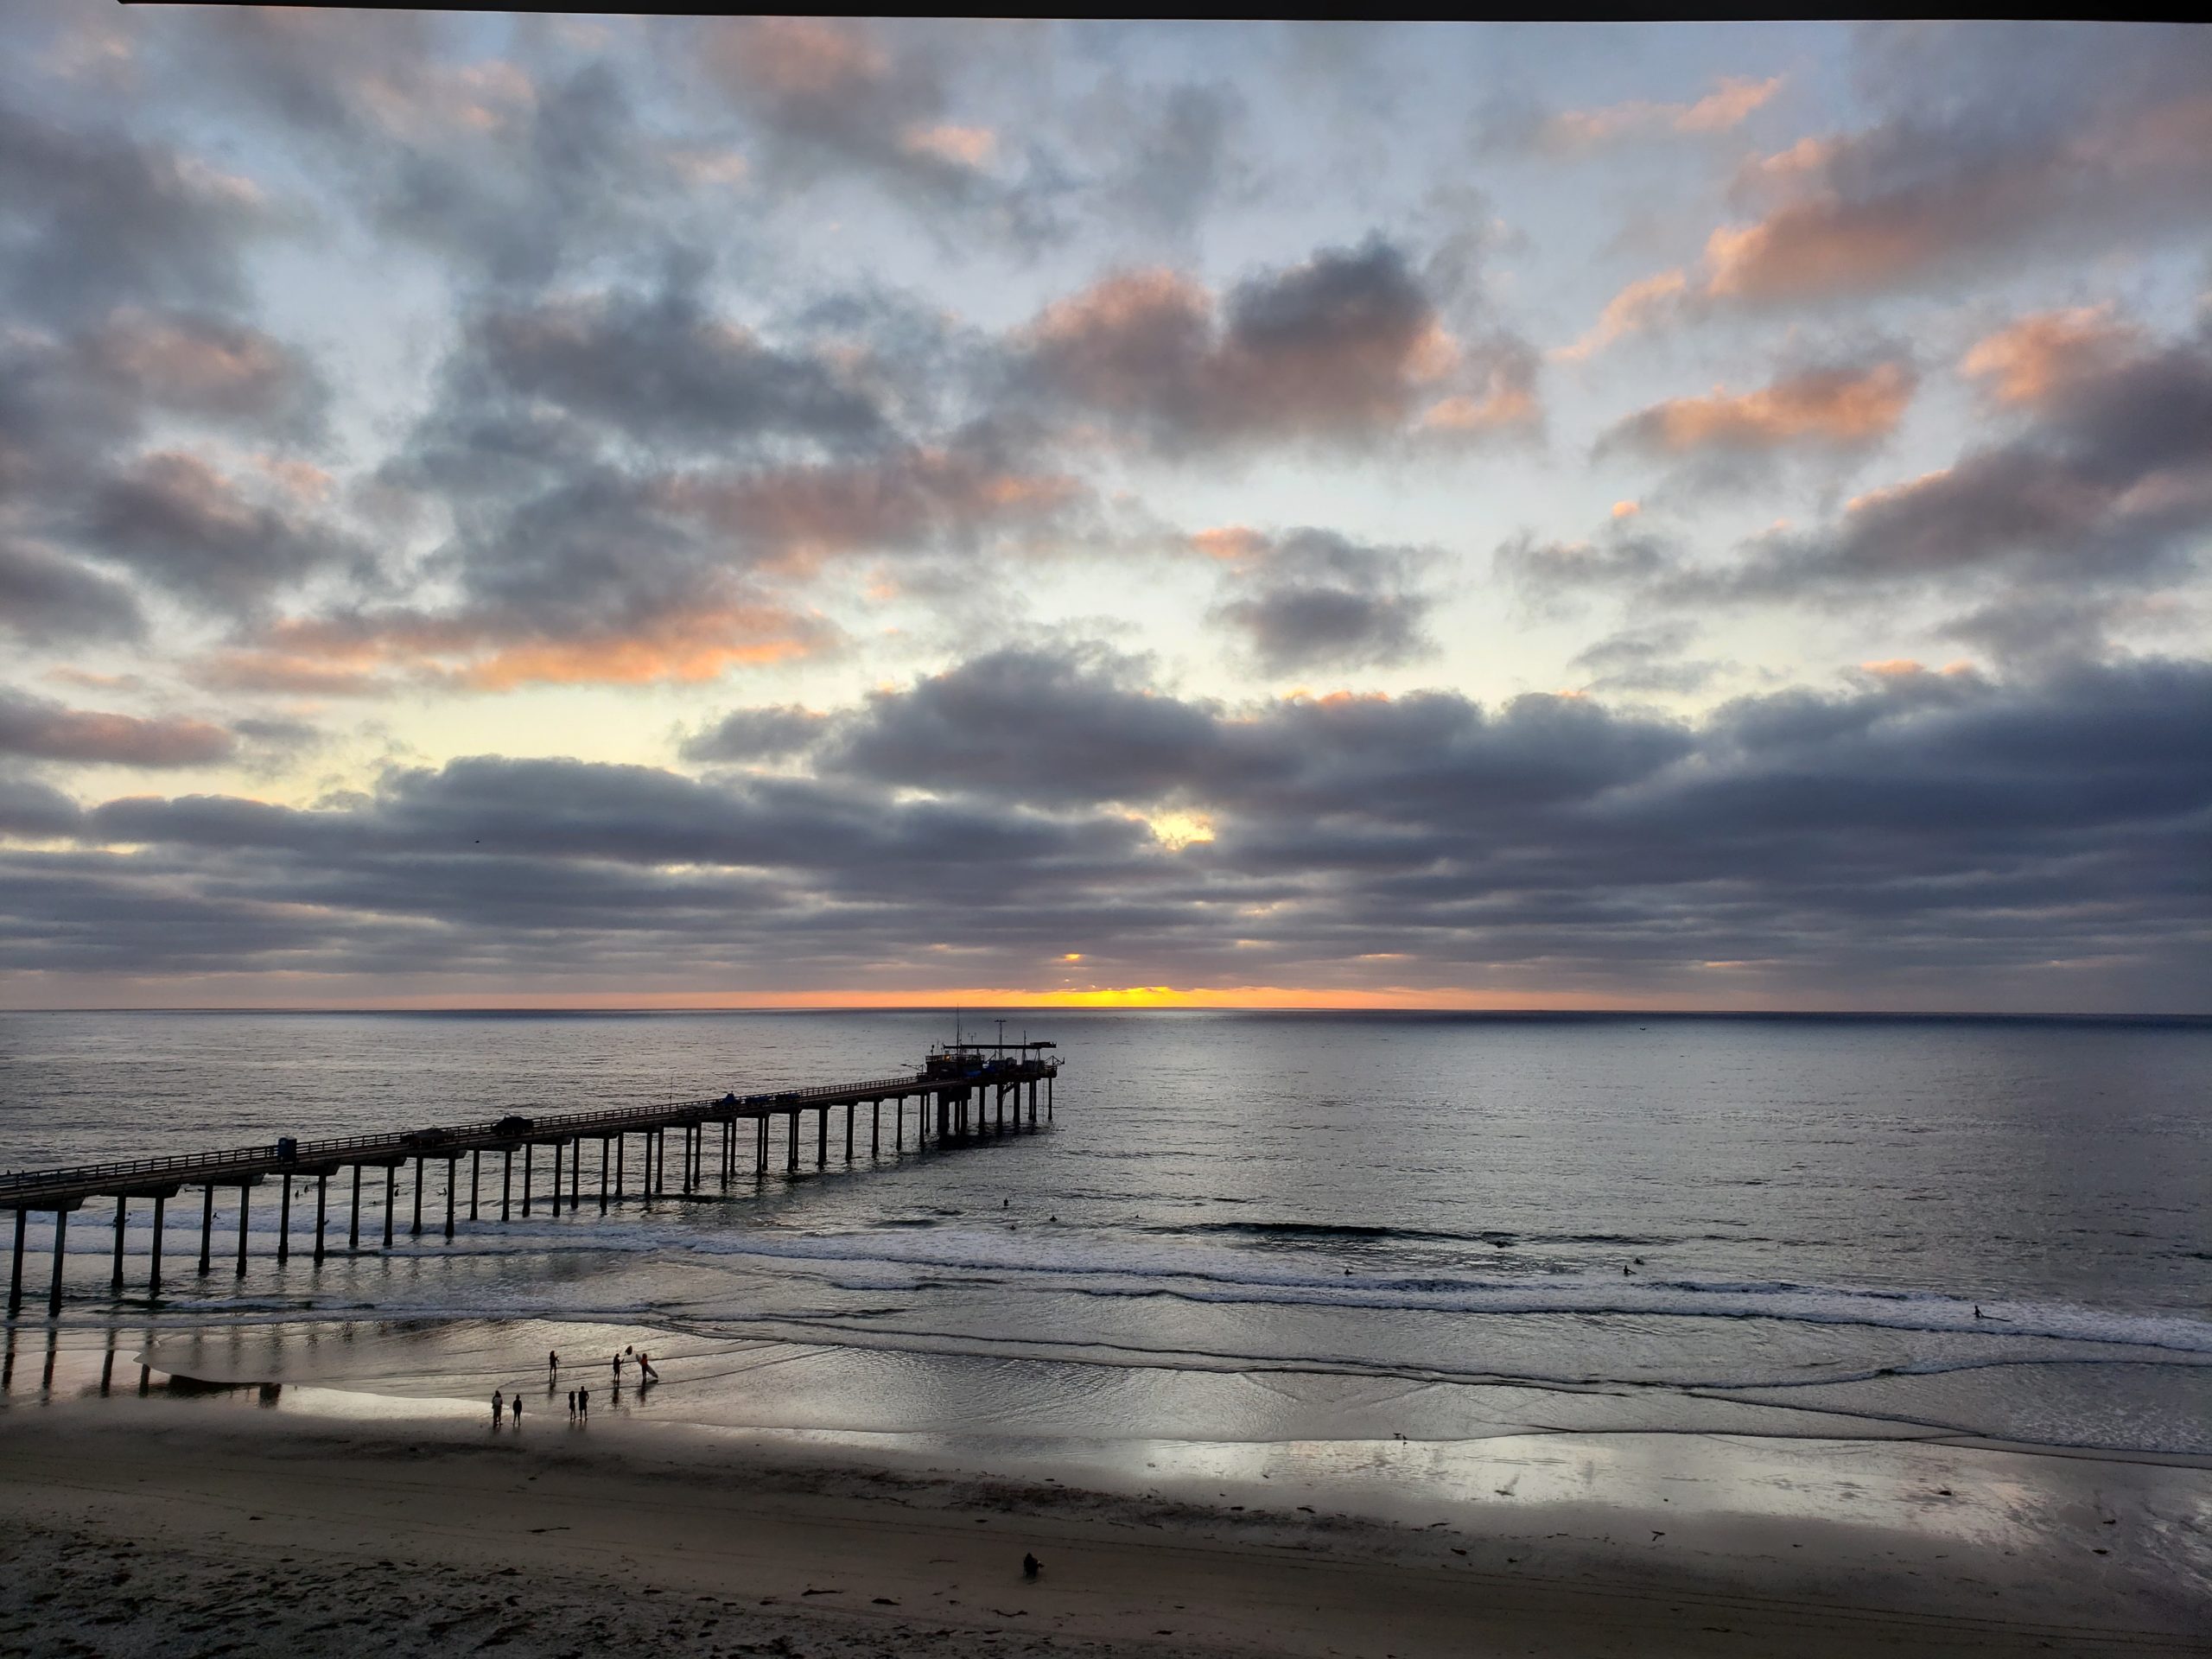 An image showing the Ellen Browning Scripps Pier surrounded by the ocean, a sunset and a cloudy sky. 